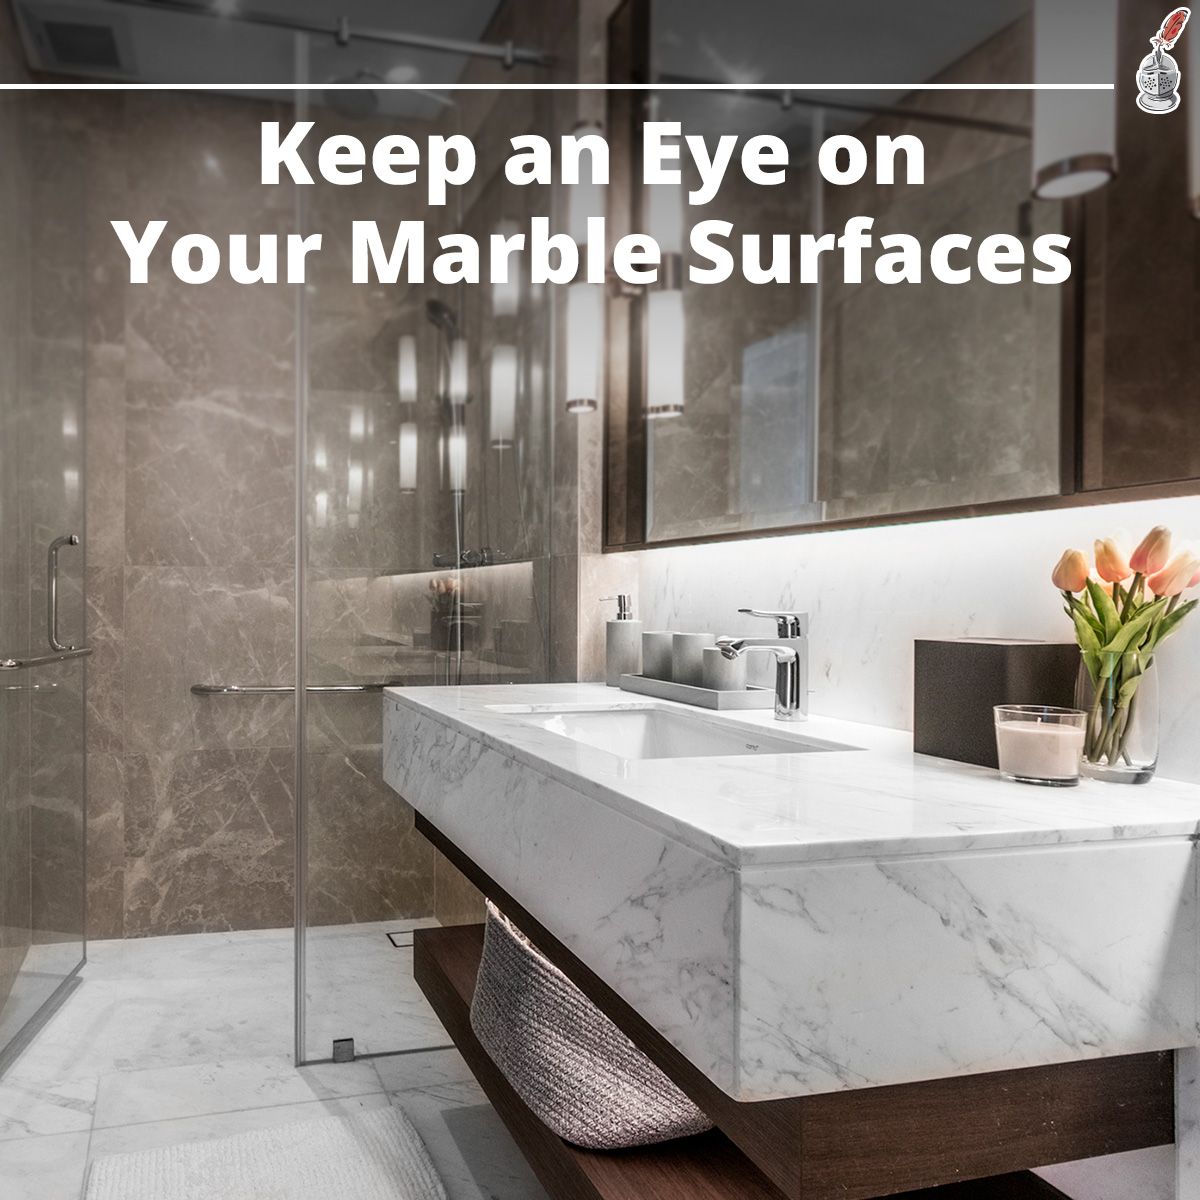 Keep an Eye on Your Marble Surfaces